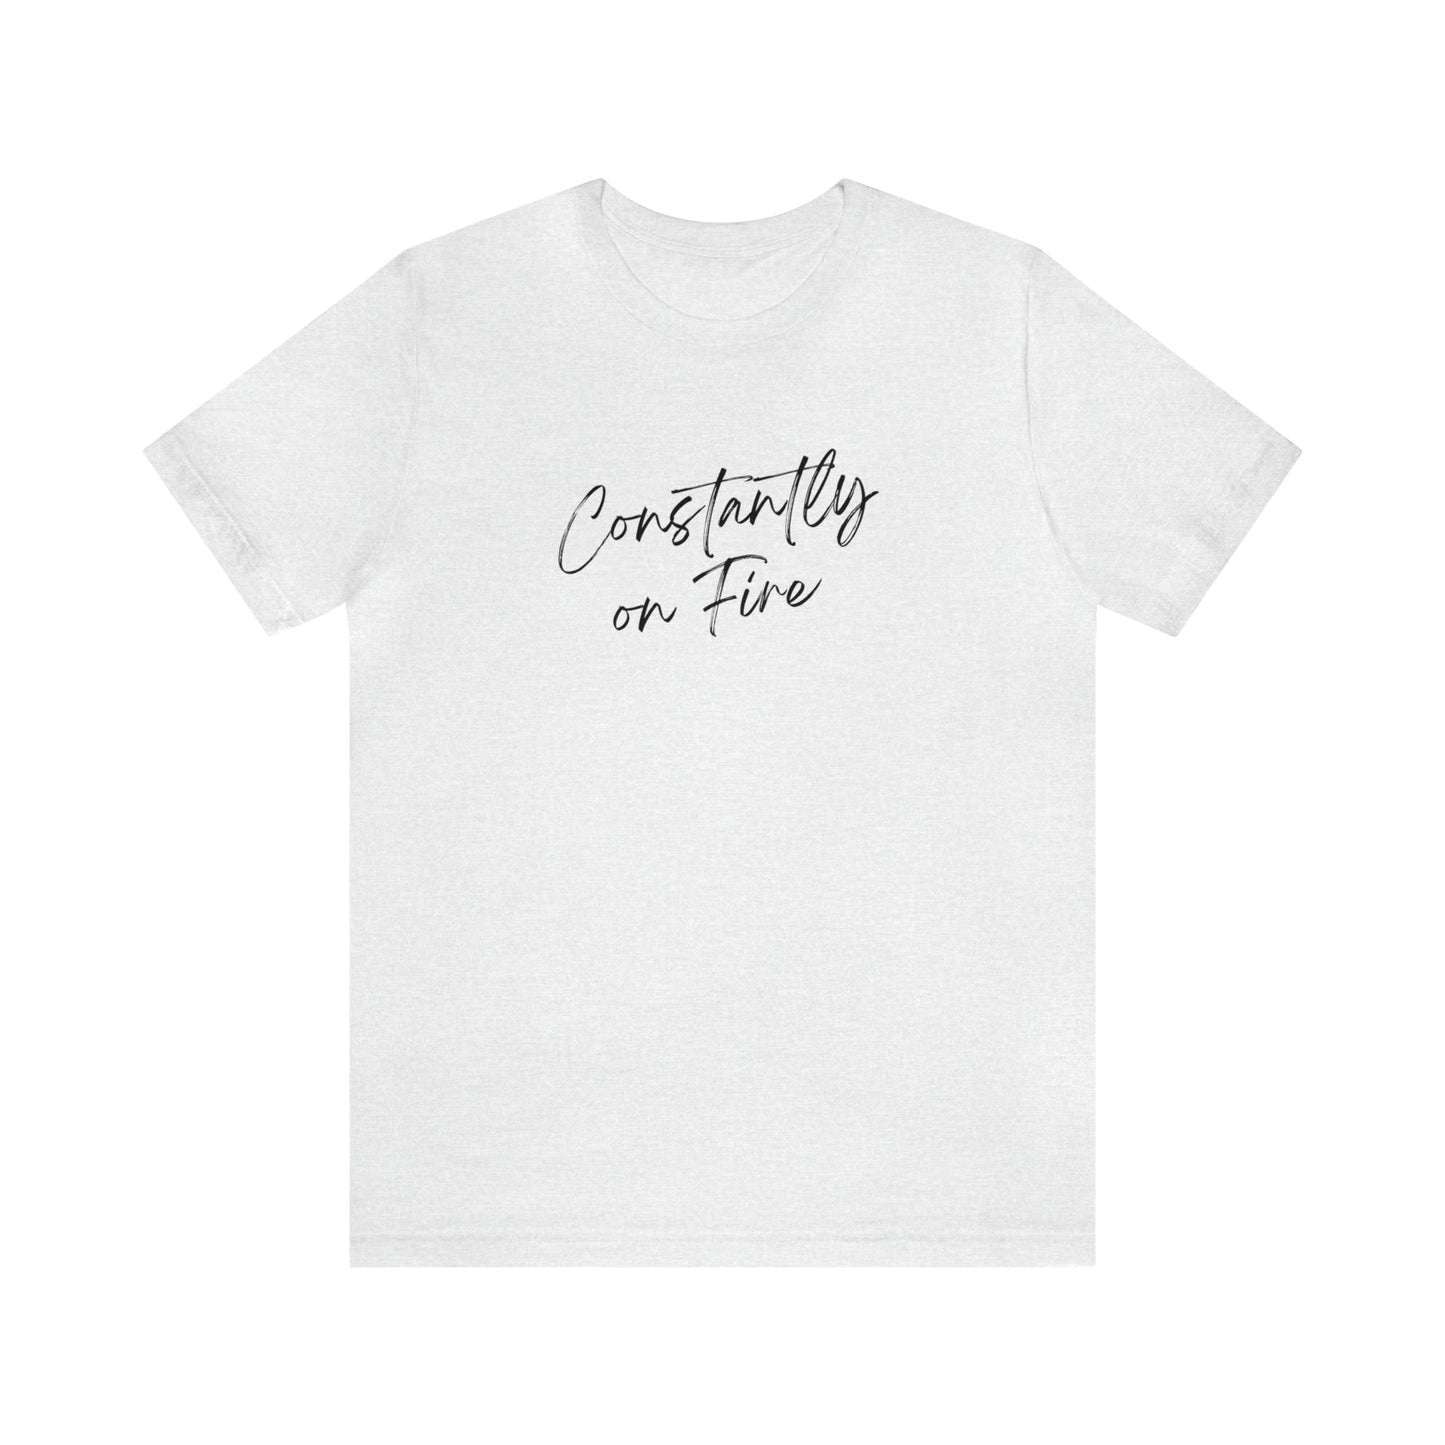 Constantly on Fire Jersey Short Sleeve T-shirt